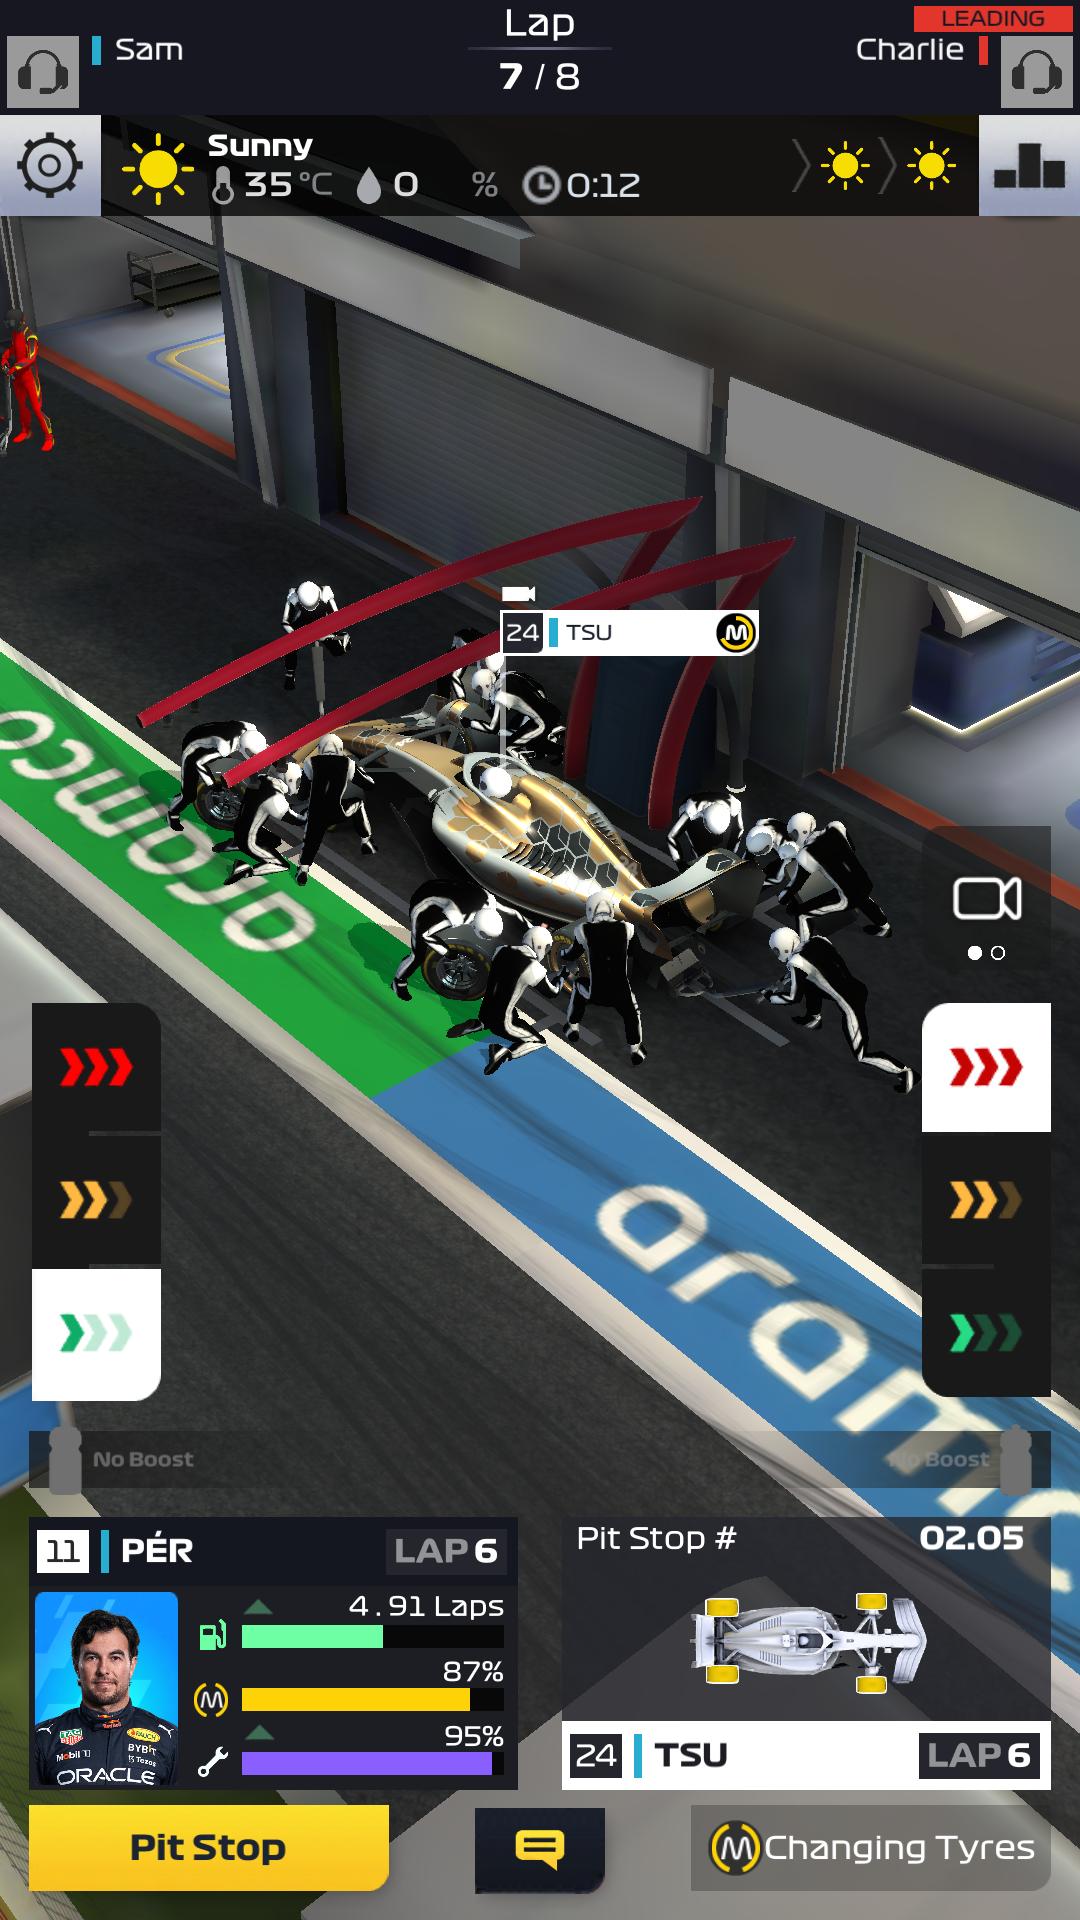 F1 Manager игры на андроид. F1 Clash. F1 Manager на андроид на ПК. Motorsport Manager Racing Android трассы.